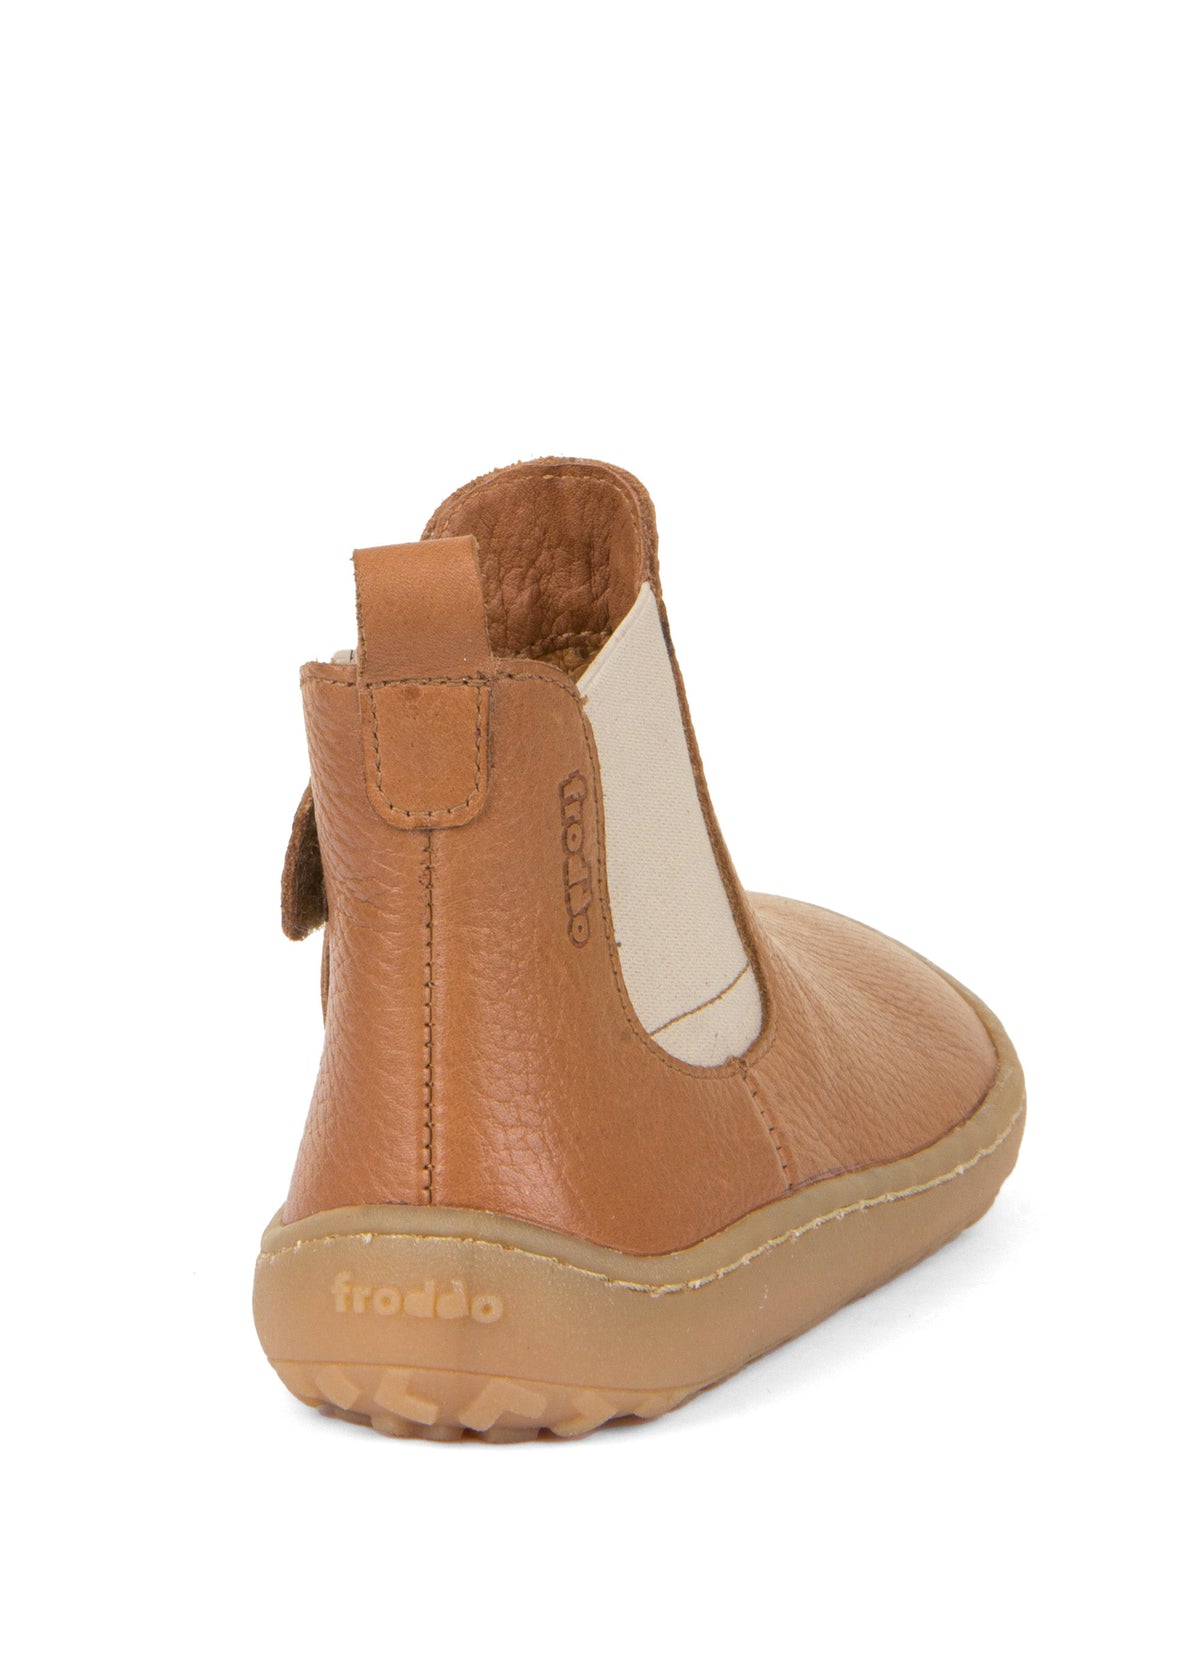 Barefoot ankle boots - Chelys, leather lining, cognac brown